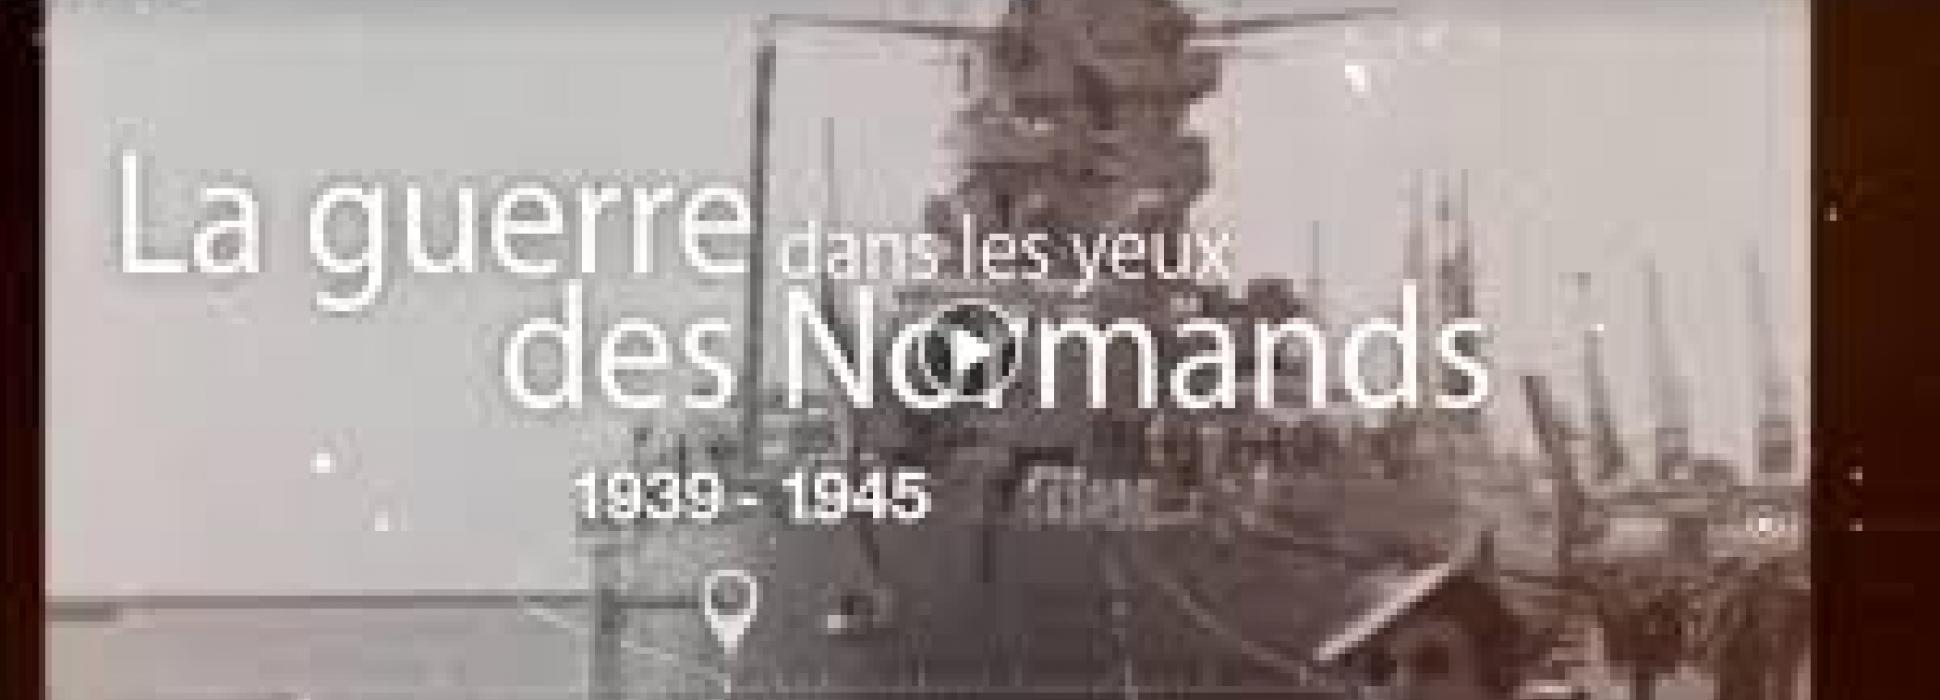 The Ouest-France newspaper mobilizes for D-Day with its series "War in the eyes of the Normans"